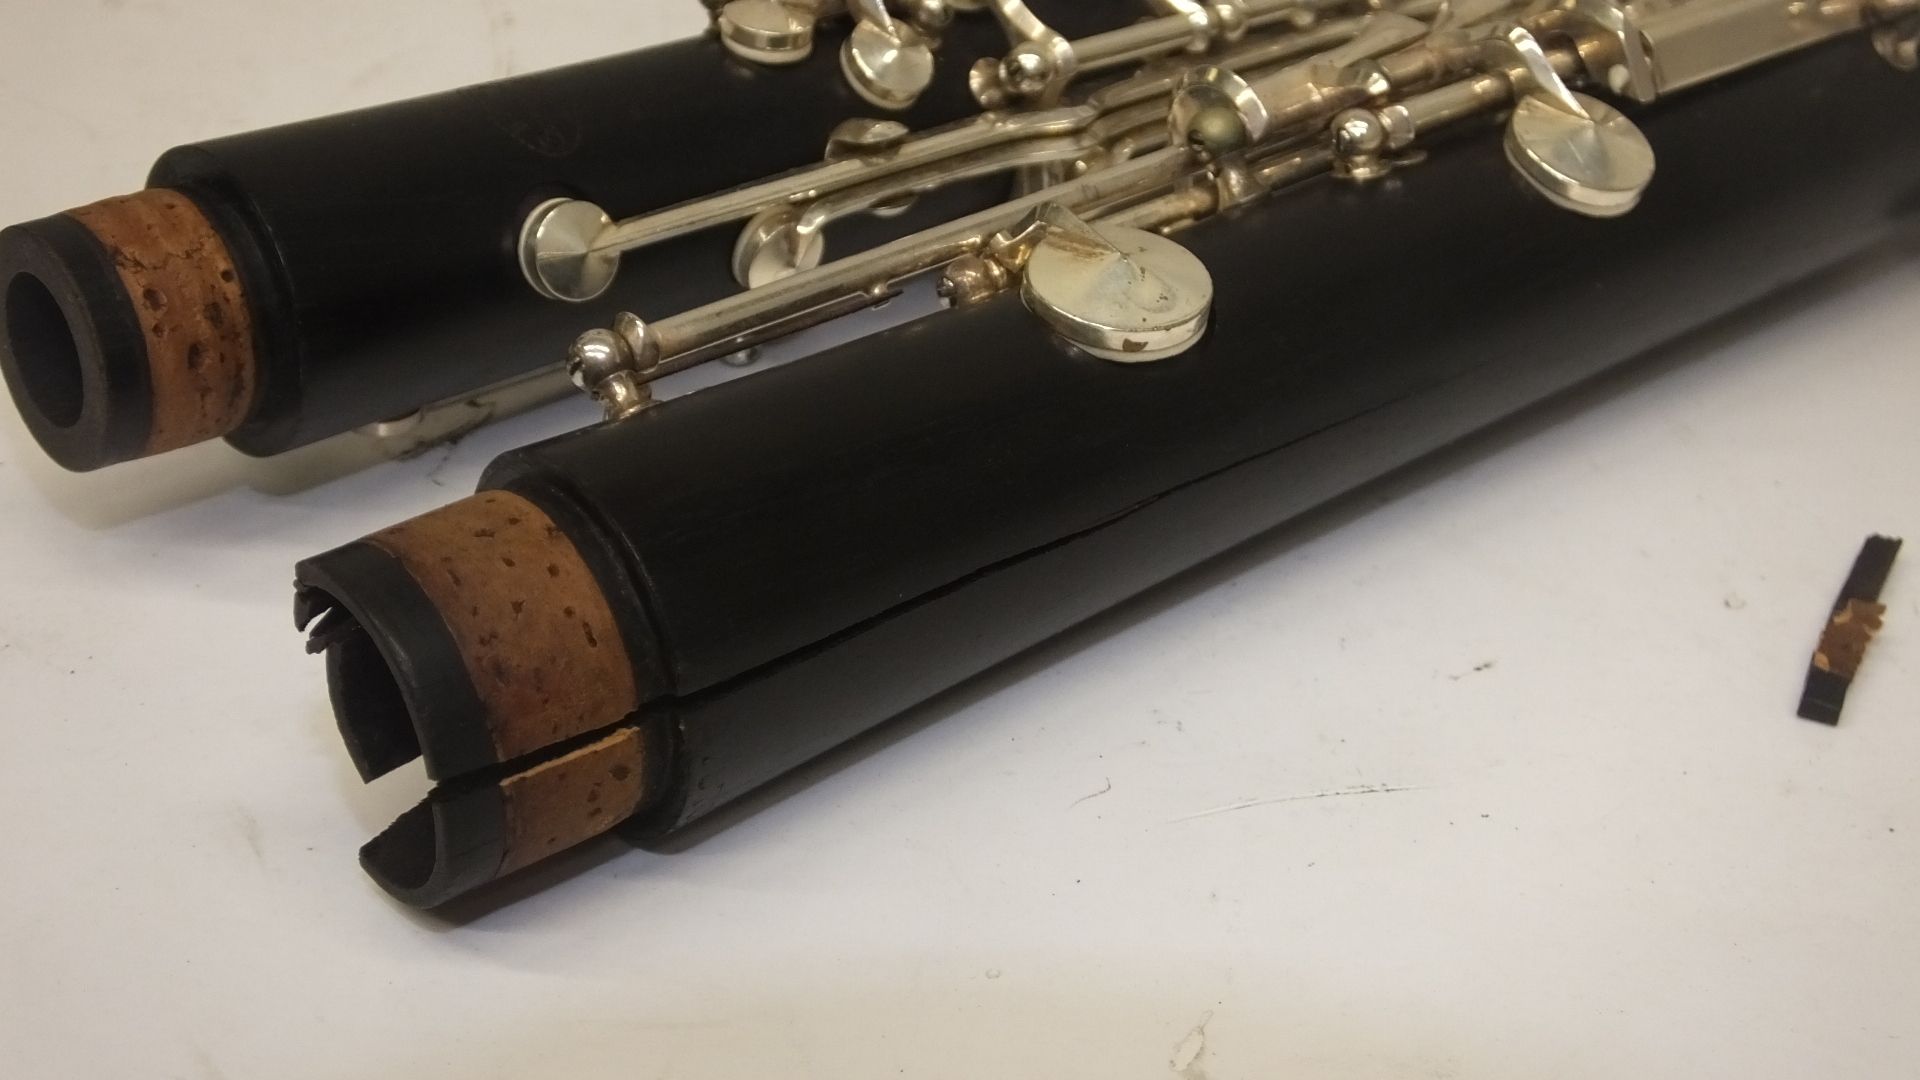 Buffet Crampon Clarinet (incomplete - damage as seen in pictures) - Serial Number - 275704 - Image 6 of 10